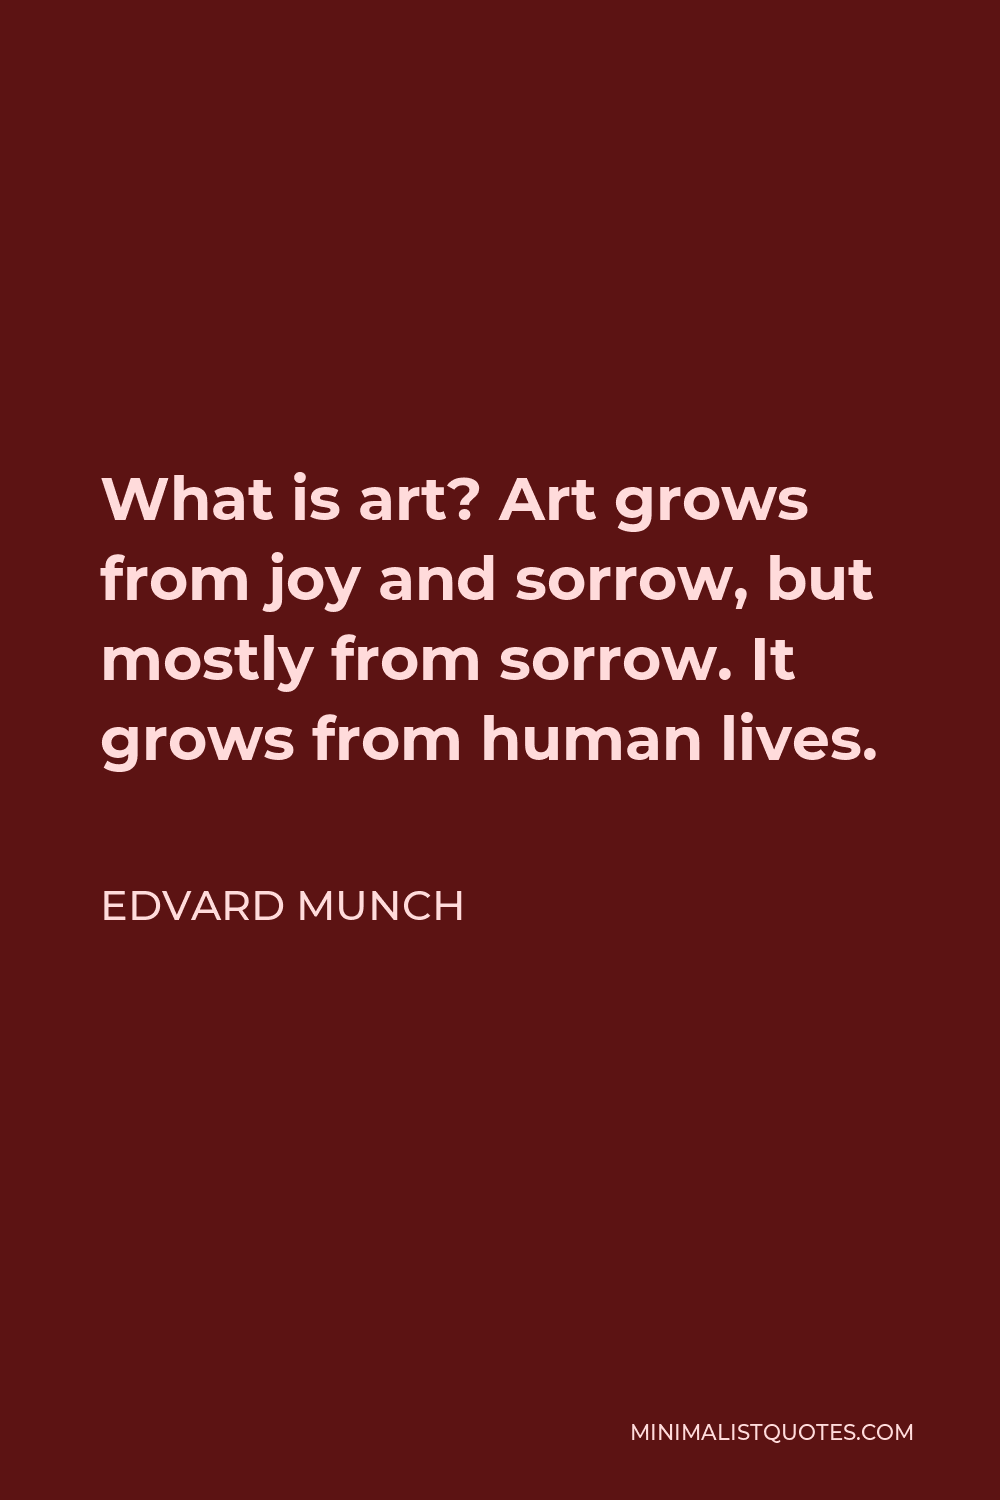 Edvard Munch Quote - What is art? Art grows from joy and sorrow, but mostly from sorrow. It grows from human lives.